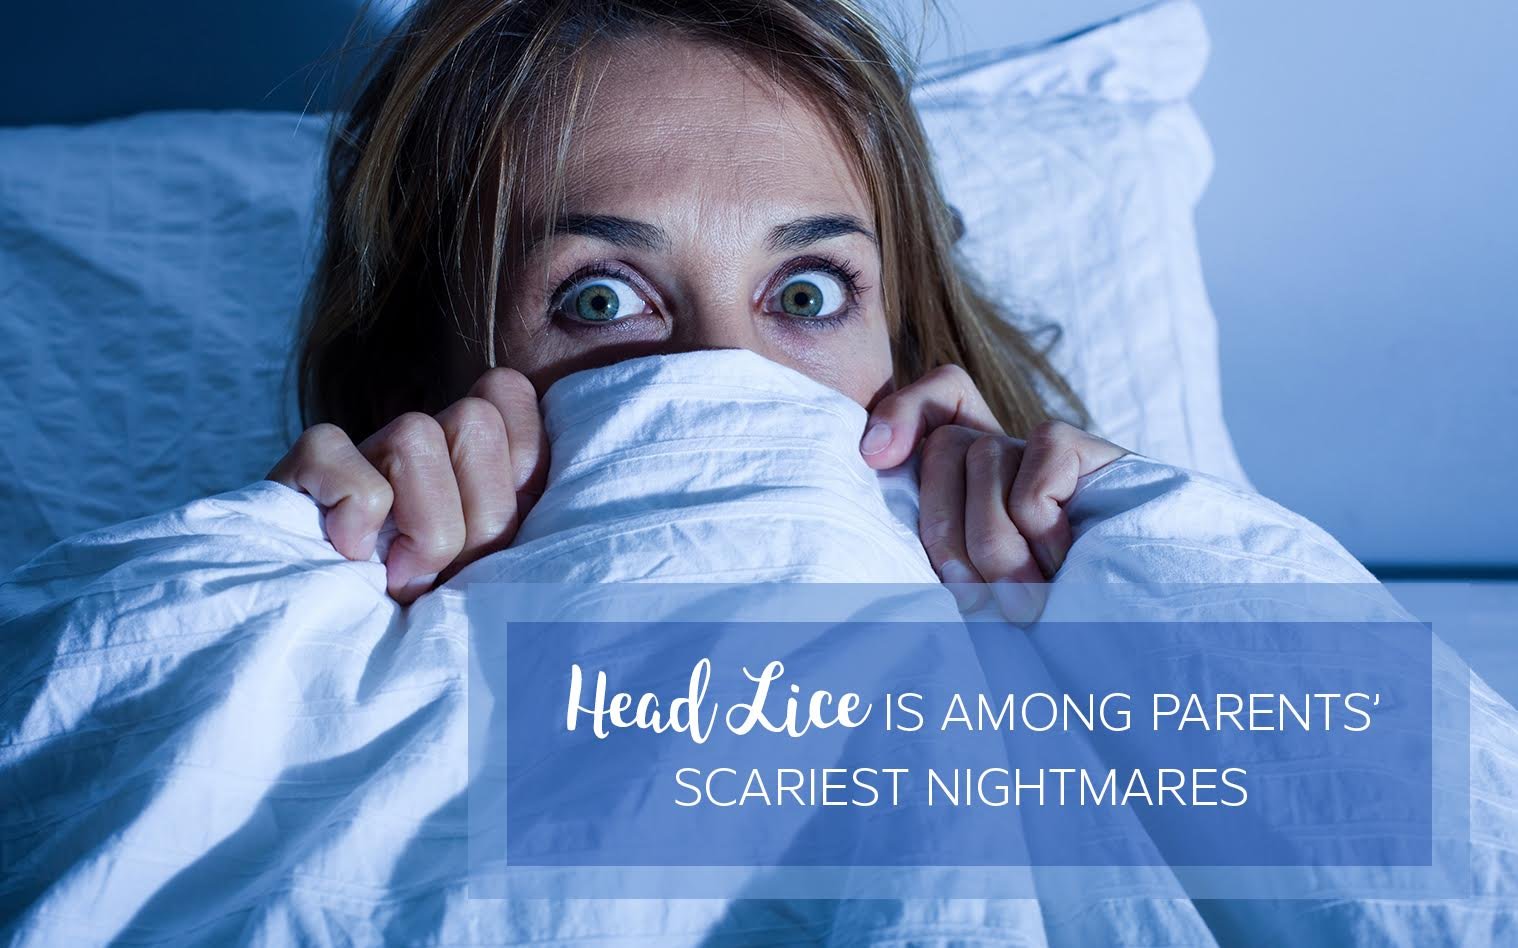 Head lice removal scares a mother hiding in bed because head lice is among parents’ scariest nightmares visit Lice Clinics of America - Utah for more information